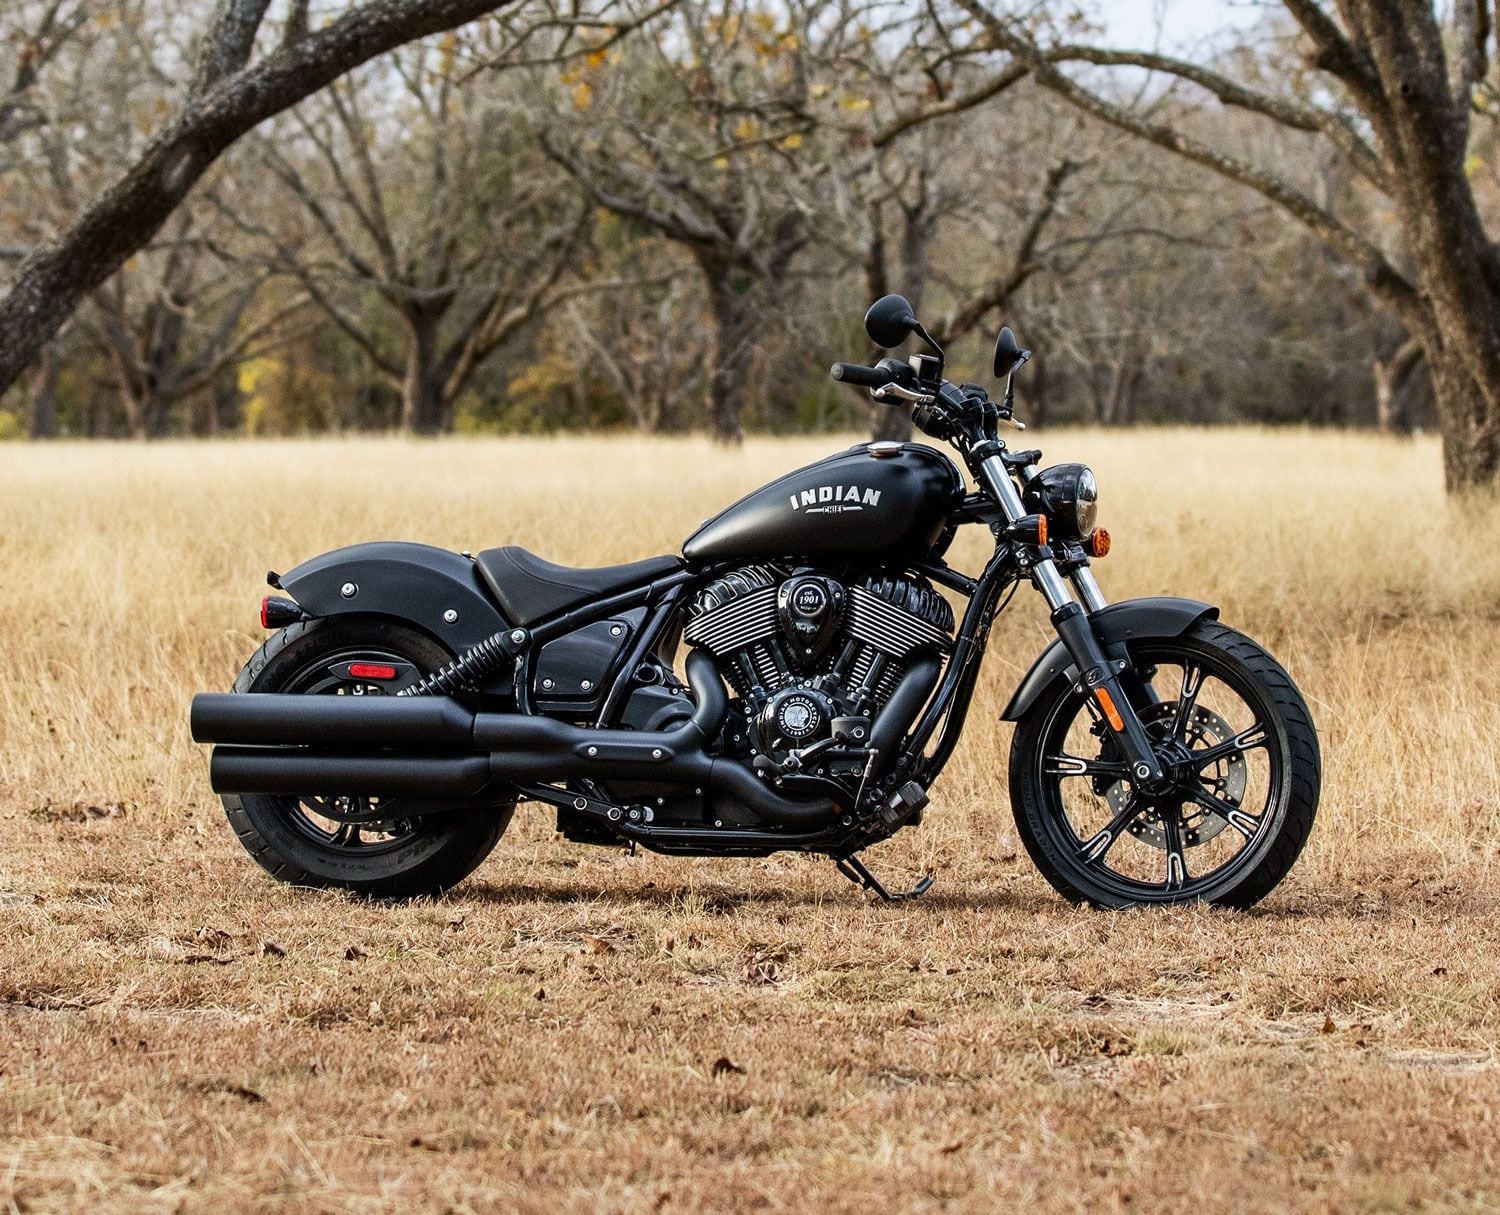 The Chief Dark Horse is the more premium model adding the more powerful Thunder Stroke 116 engine, ABS, and Ride Command. This is the Black Smoke color.